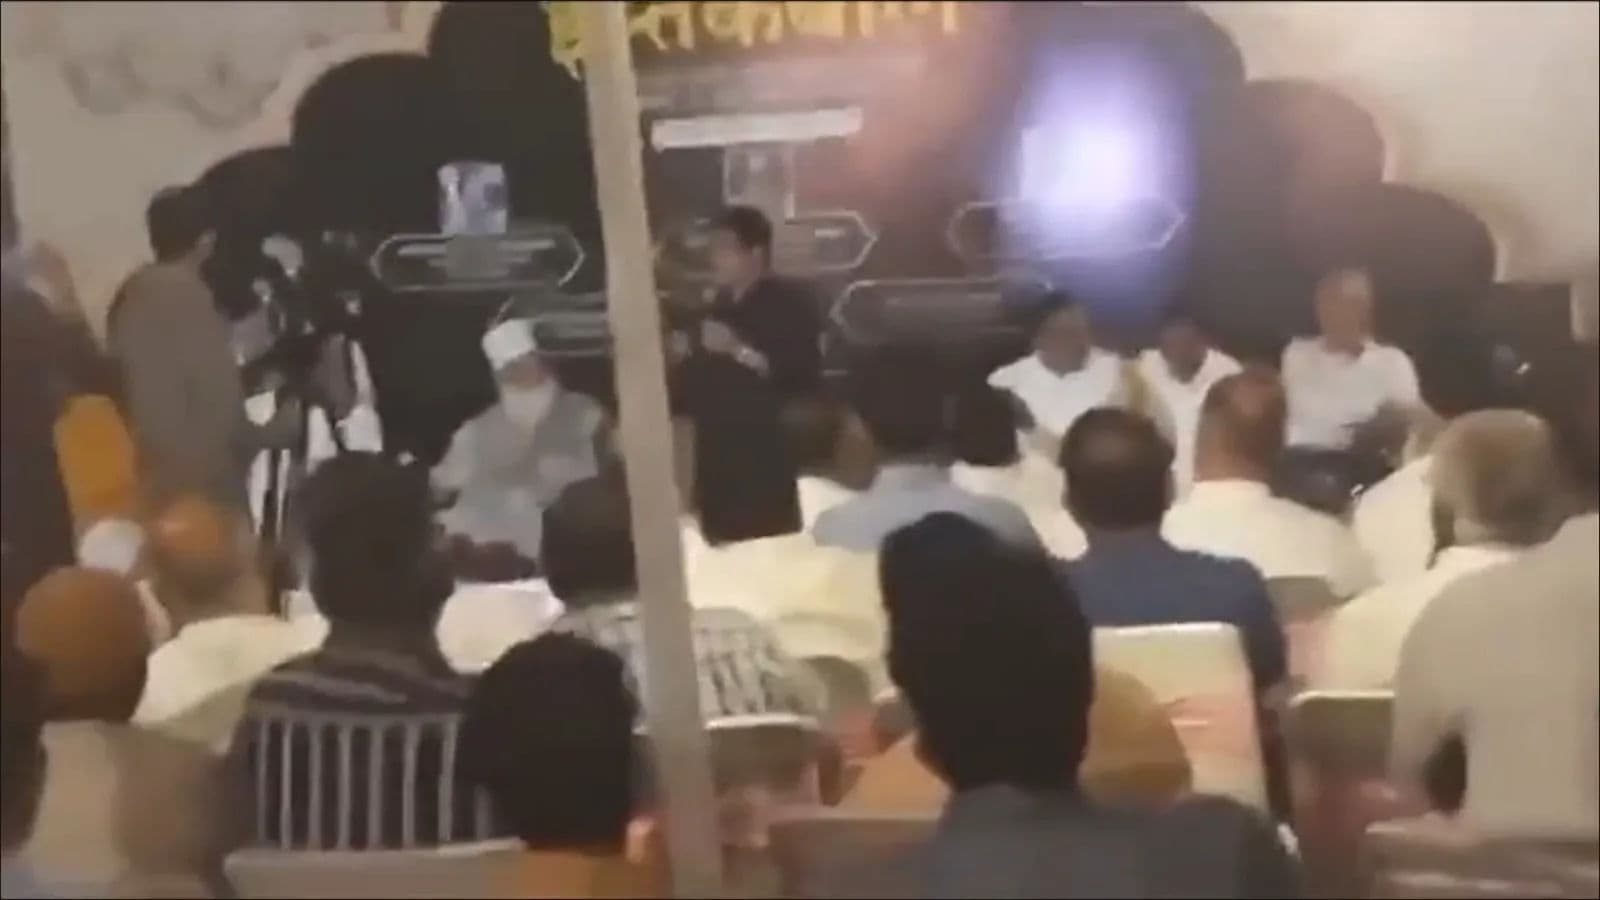 Video released by BJP